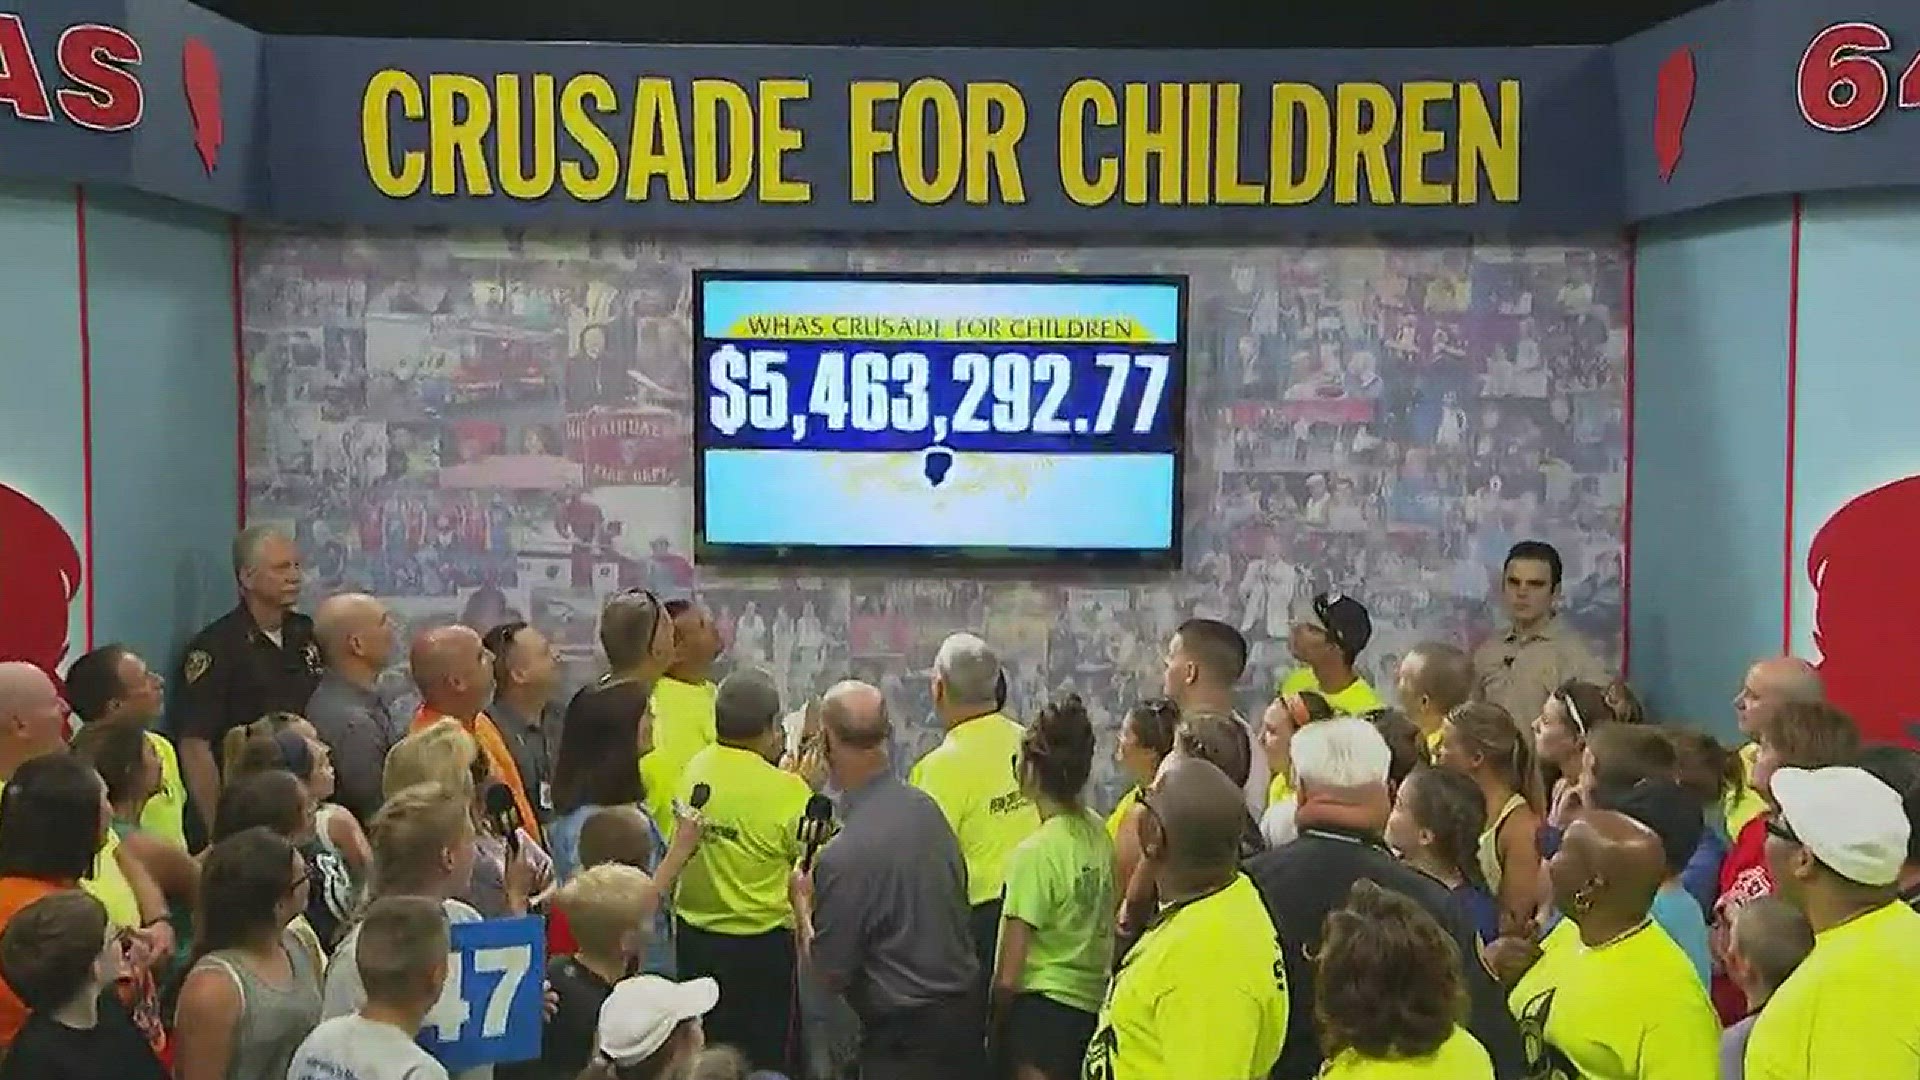 New Donation boosts final Crusade total